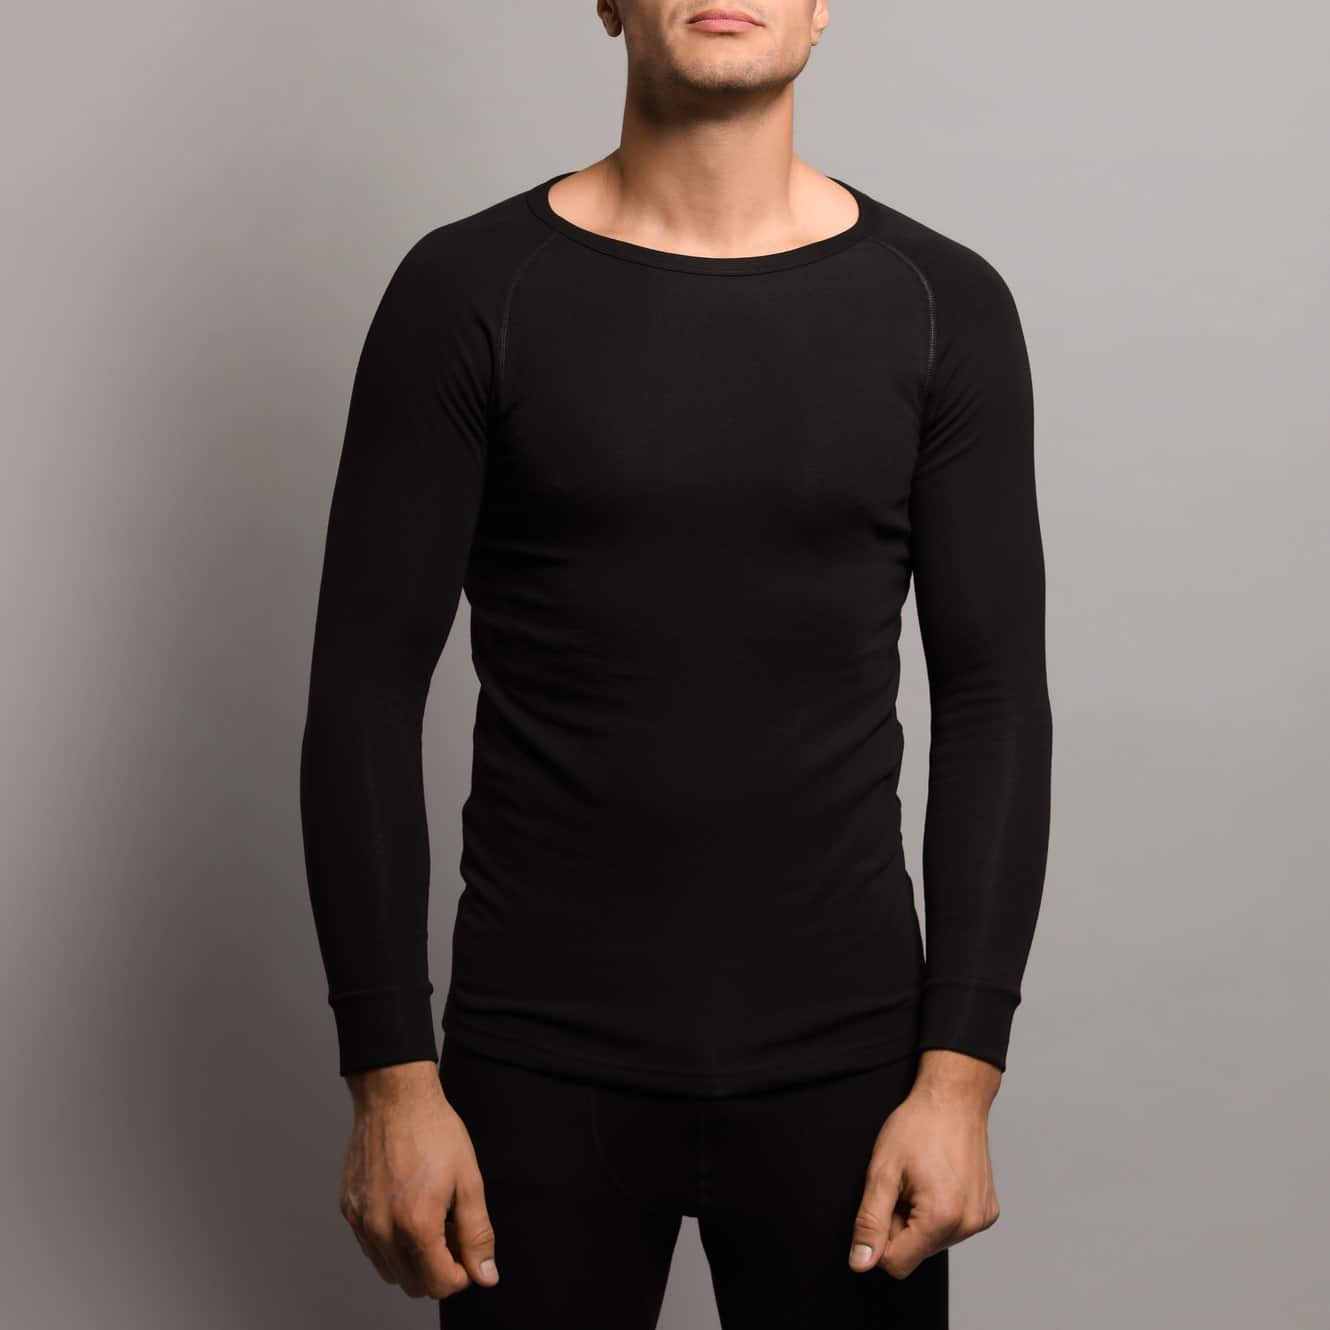 Versatile Men's Waffle Thermal Top Long Sleeve Crew Neck Shirt for Daily  Wear